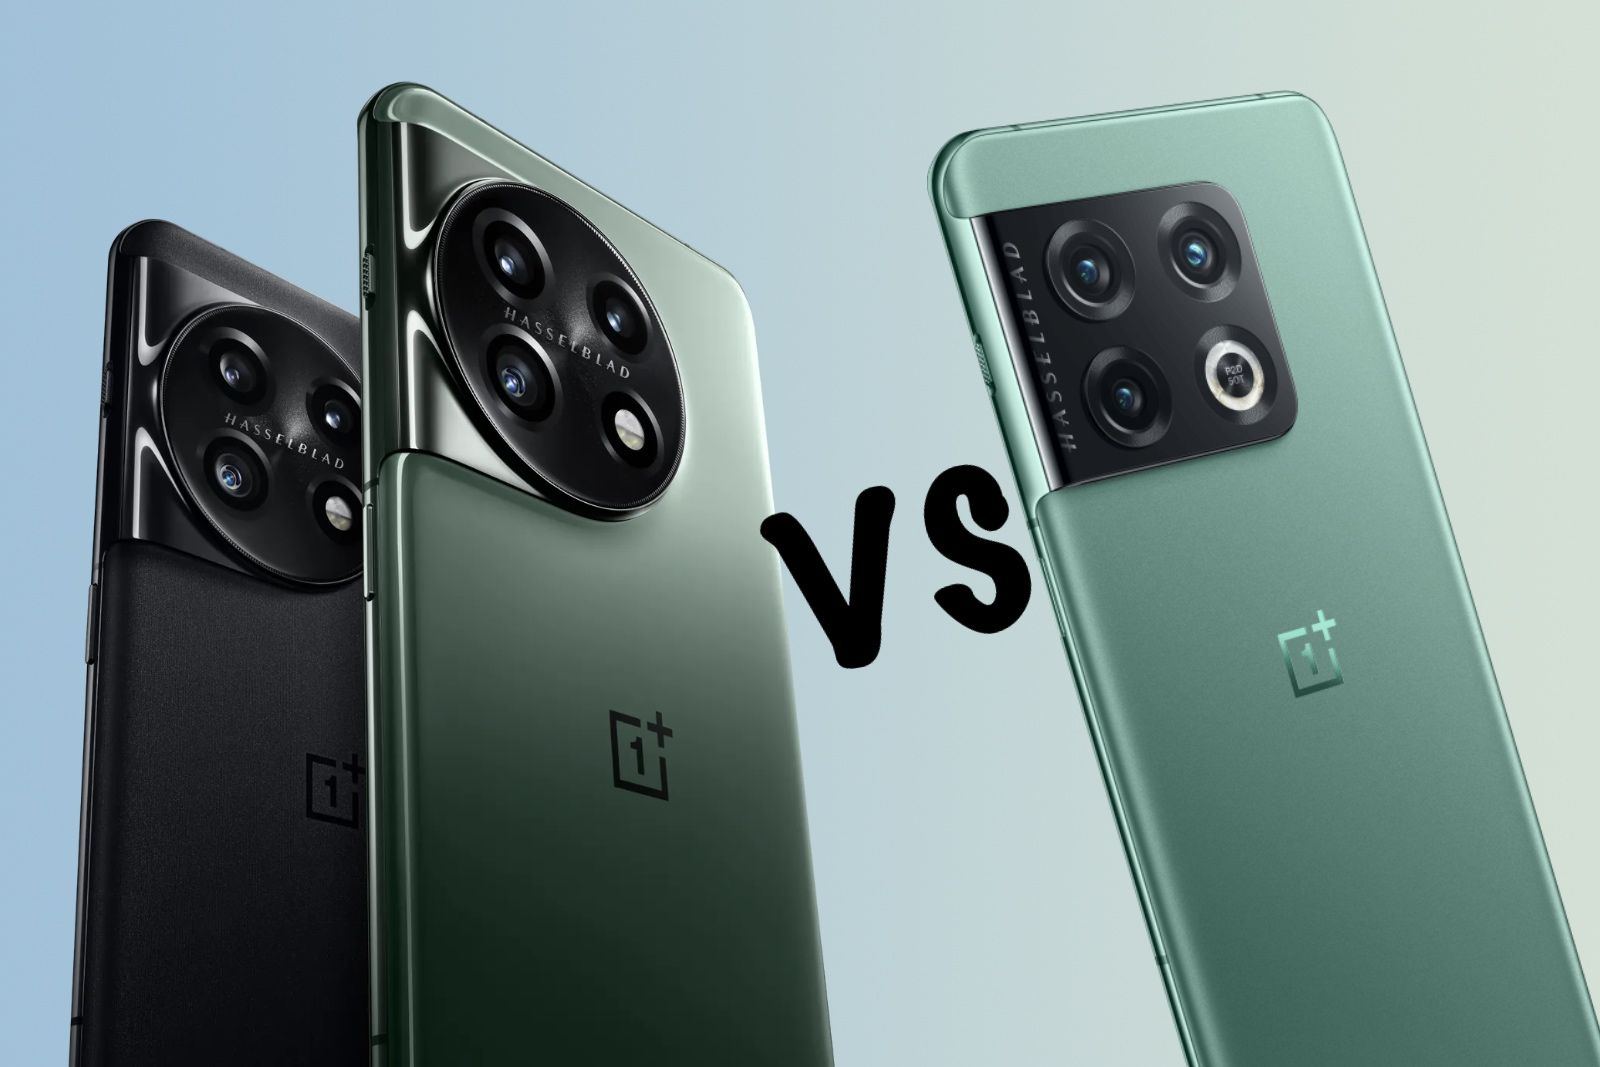 OnePlus 11 vs OnePlus 10 Pro: What's the difference?